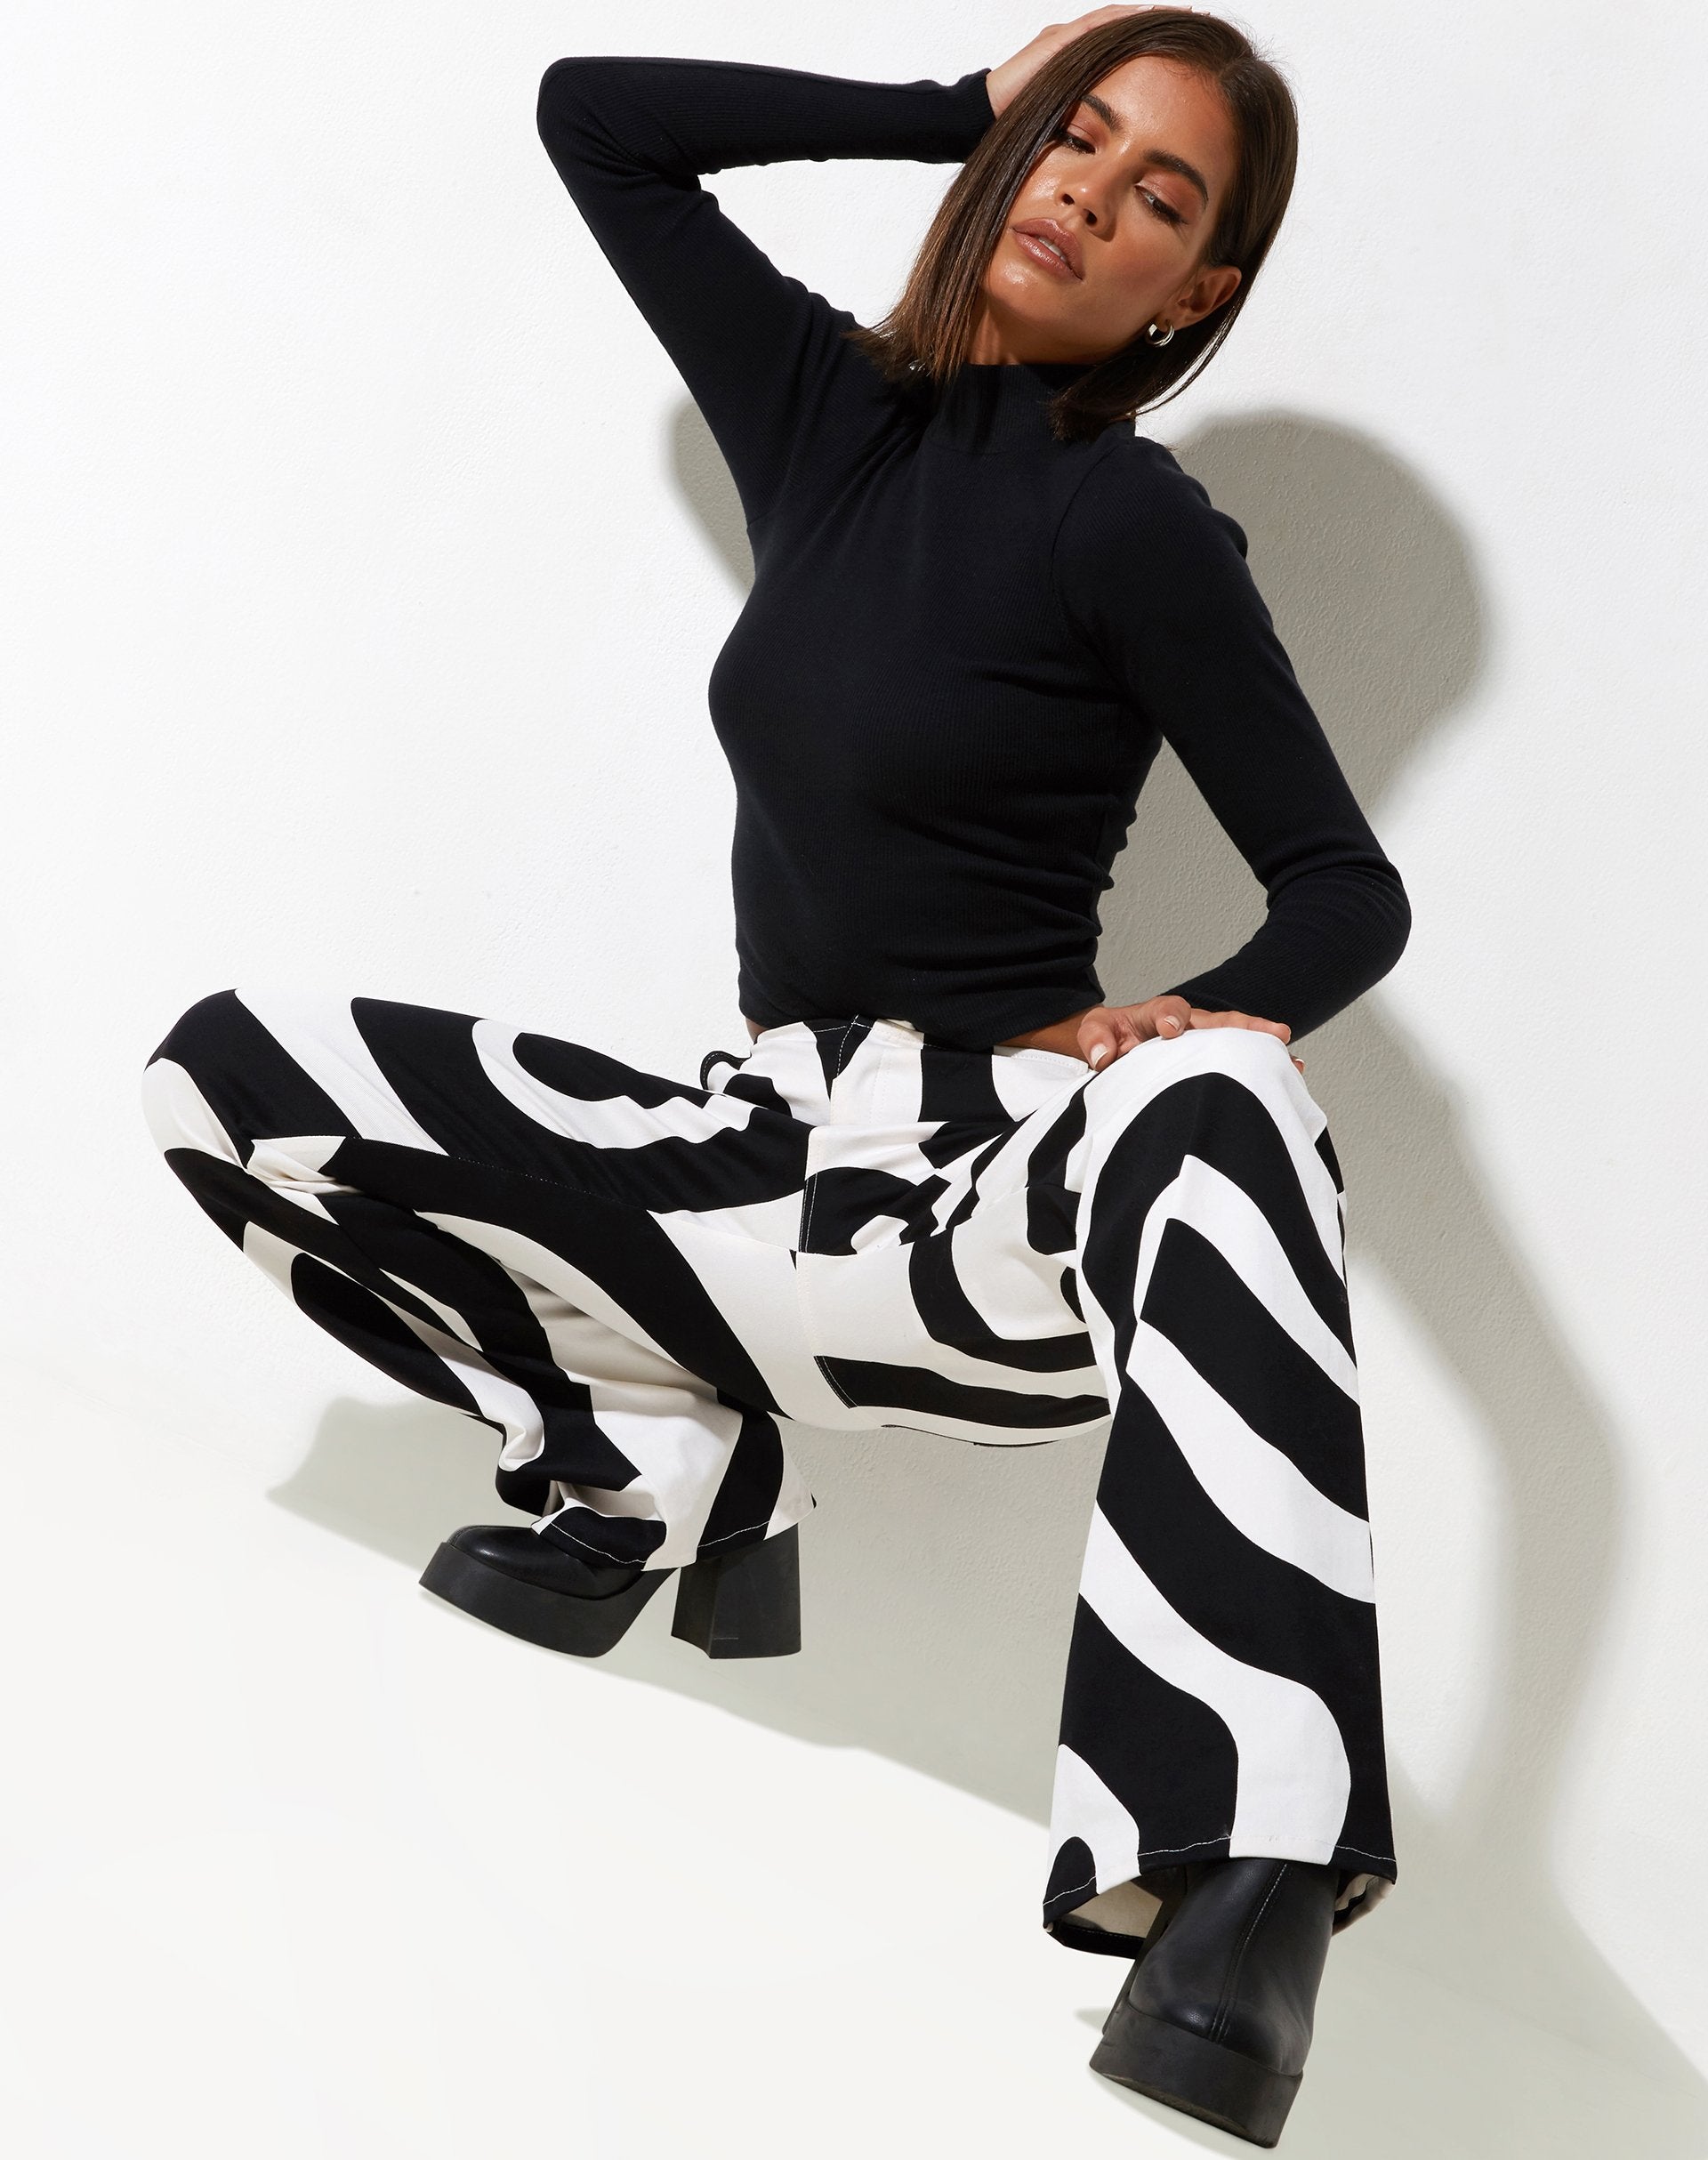 Zoetry Trouser in Optic Swirl Black and White